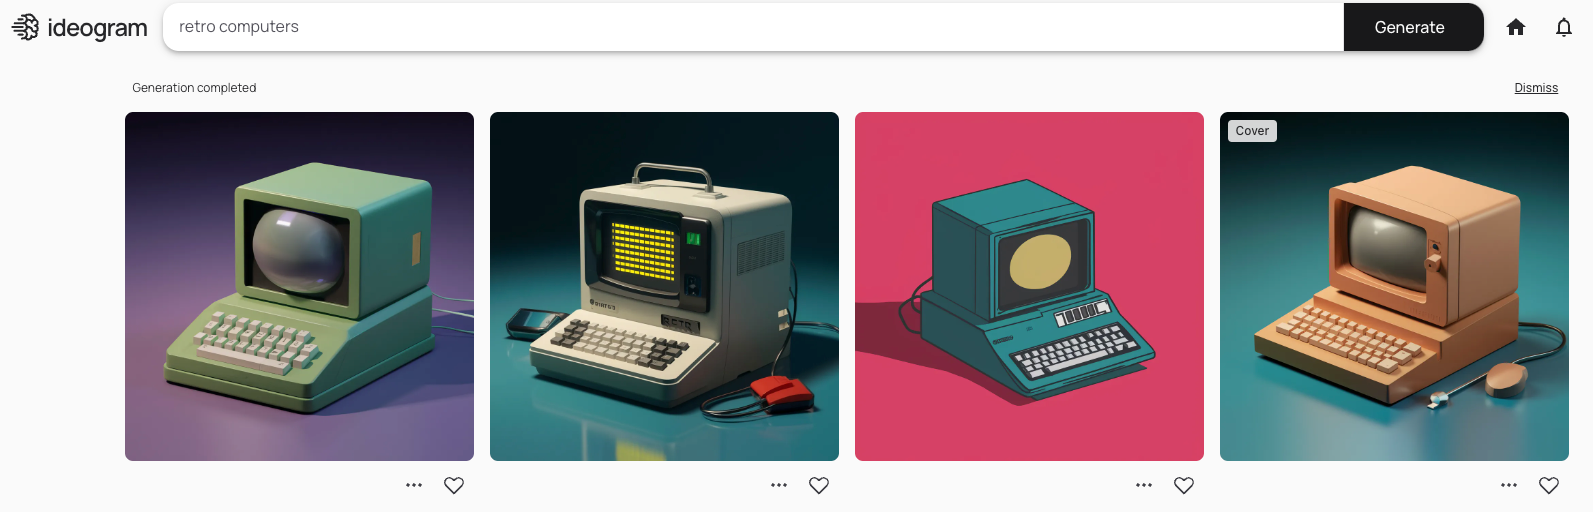 Ideogram website with images of retro computers.